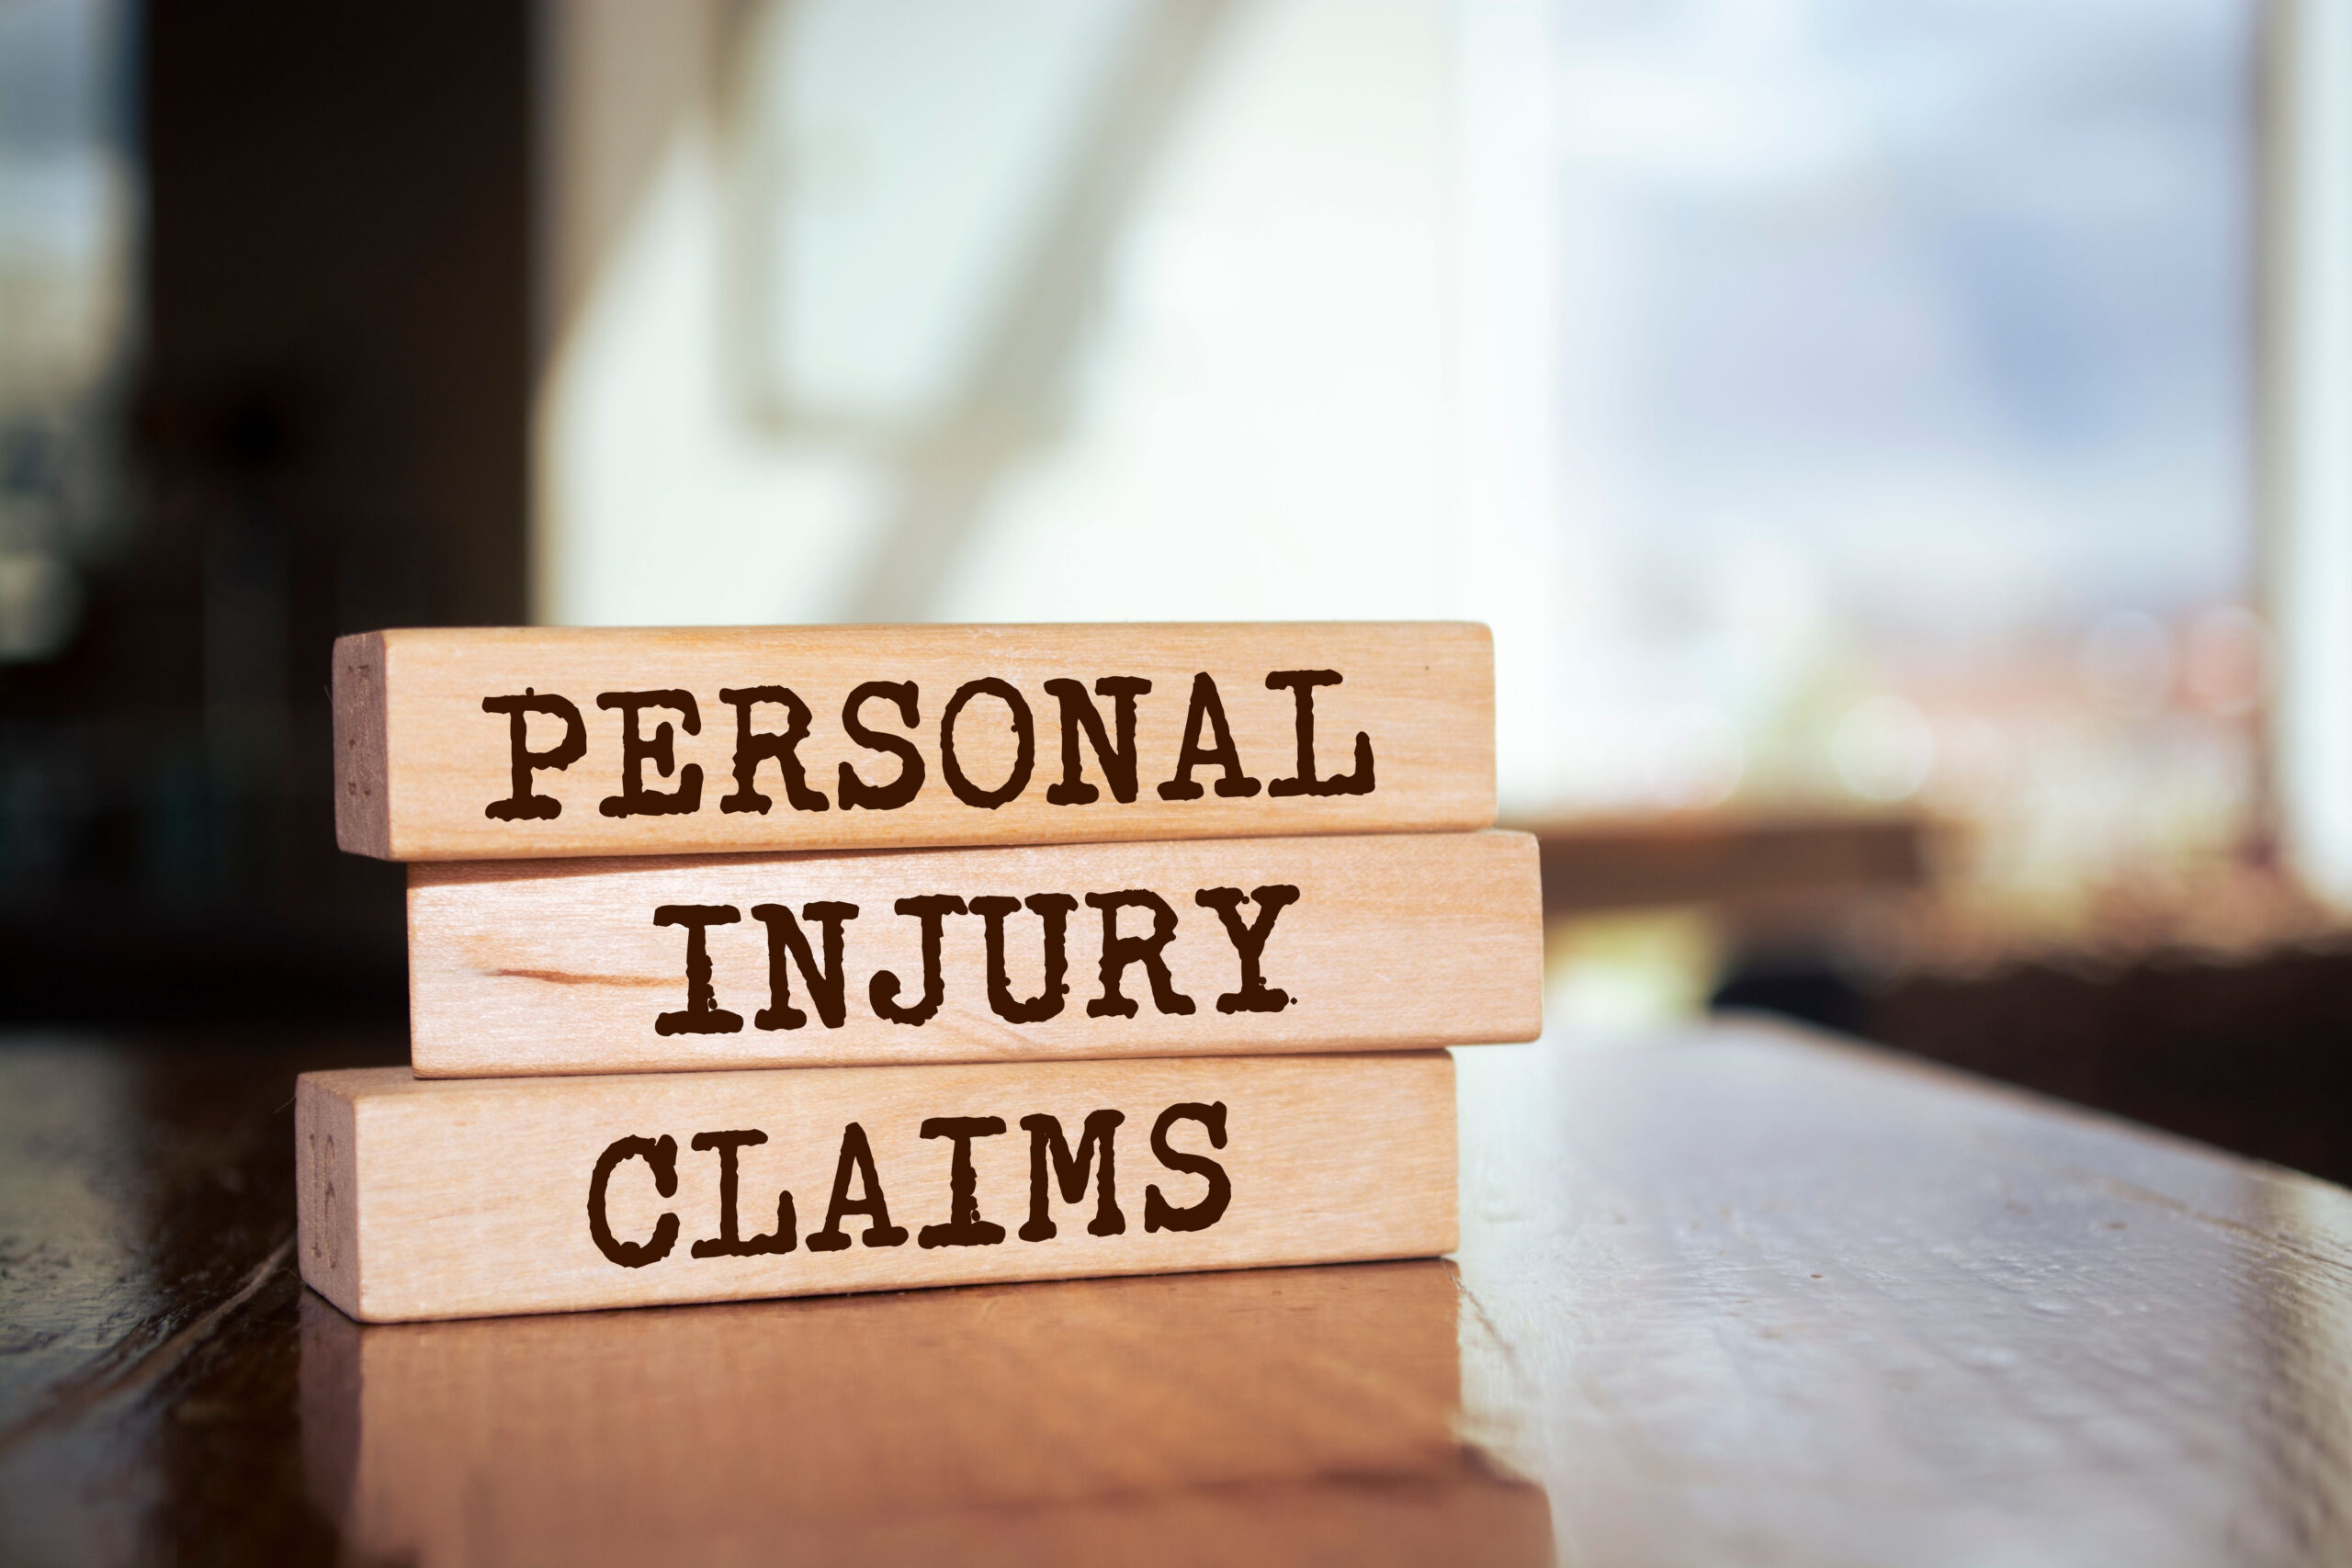 Personal injury claims: TPD